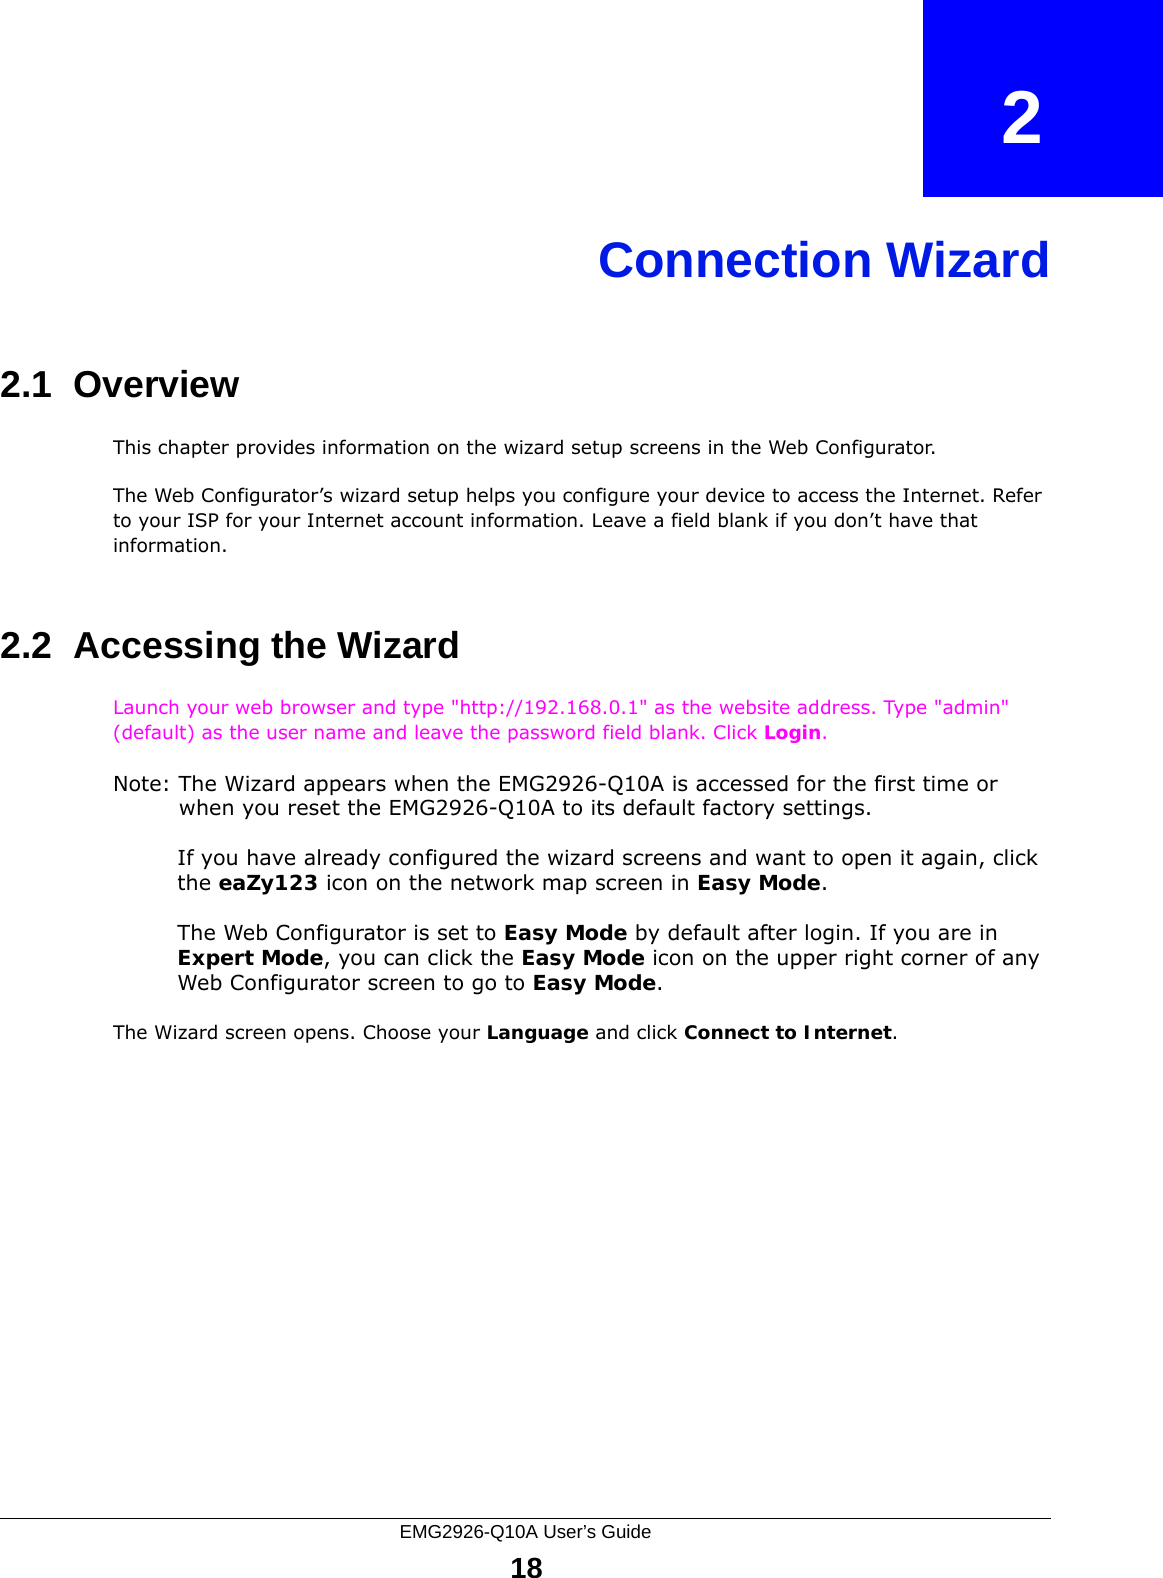 EMG2926-Q10A User’s Guide18CHAPTER   2Connection Wizard2.1  OverviewThis chapter provides information on the wizard setup screens in the Web Configurator.The Web Configurator’s wizard setup helps you configure your device to access the Internet. Refer to your ISP for your Internet account information. Leave a field blank if you don’t have that information.2.2  Accessing the WizardLaunch your web browser and type &quot;http://192.168.0.1&quot; as the website address. Type &quot;admin&quot; (default) as the user name and leave the password field blank. Click Login.Note: The Wizard appears when the EMG2926-Q10A is accessed for the first time or when you reset the EMG2926-Q10A to its default factory settings.If you have already configured the wizard screens and want to open it again, click the eaZy123 icon on the network map screen in Easy Mode.The Web Configurator is set to Easy Mode by default after login. If you are in Expert Mode, you can click the Easy Mode icon on the upper right corner of any Web Configurator screen to go to Easy Mode.The Wizard screen opens. Choose your Language and click Connect to Internet.